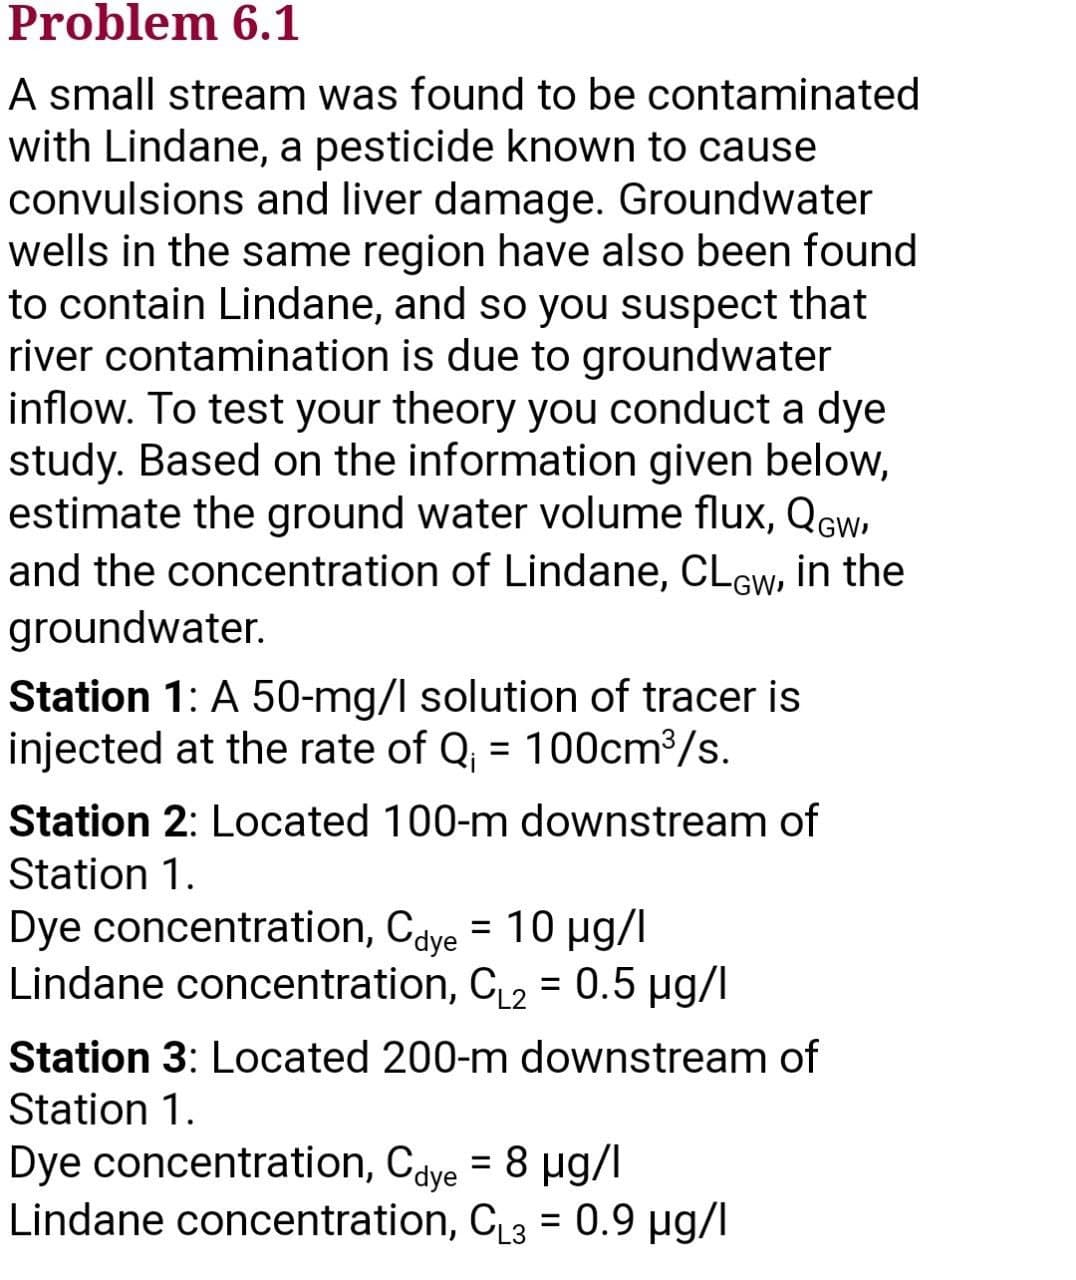 Problem 6.1
A small stream was found to be contaminated
with Lindane, a pesticide known to cause
convulsions and liver damage. Groundwater
wells in the same region have also been found
to contain Lindane, and so you suspect that
river contamination is due to groundwater
inflow. To test your theory you conduct a dye
study. Based on the information given below,
estimate the ground water volume flux, QGw,
and the concentration of Lindane, CLow, in the
groundwater.
Station 1: A 50-mg/l solution of tracer is
injected at the rate of Q₁ = 100cm³/s.
Station 2: Located 100-m downstream of
Station 1.
Dye concentration, Cdye = 10 µg/l
Lindane concentration, C₁₂ = 0.5 µg/l
Station 3: Located 200-m downstream of
Station 1.
Dye concentration, Cdye = 8 µg/l
Lindane concentration, C₁3= 0.9 µg/l